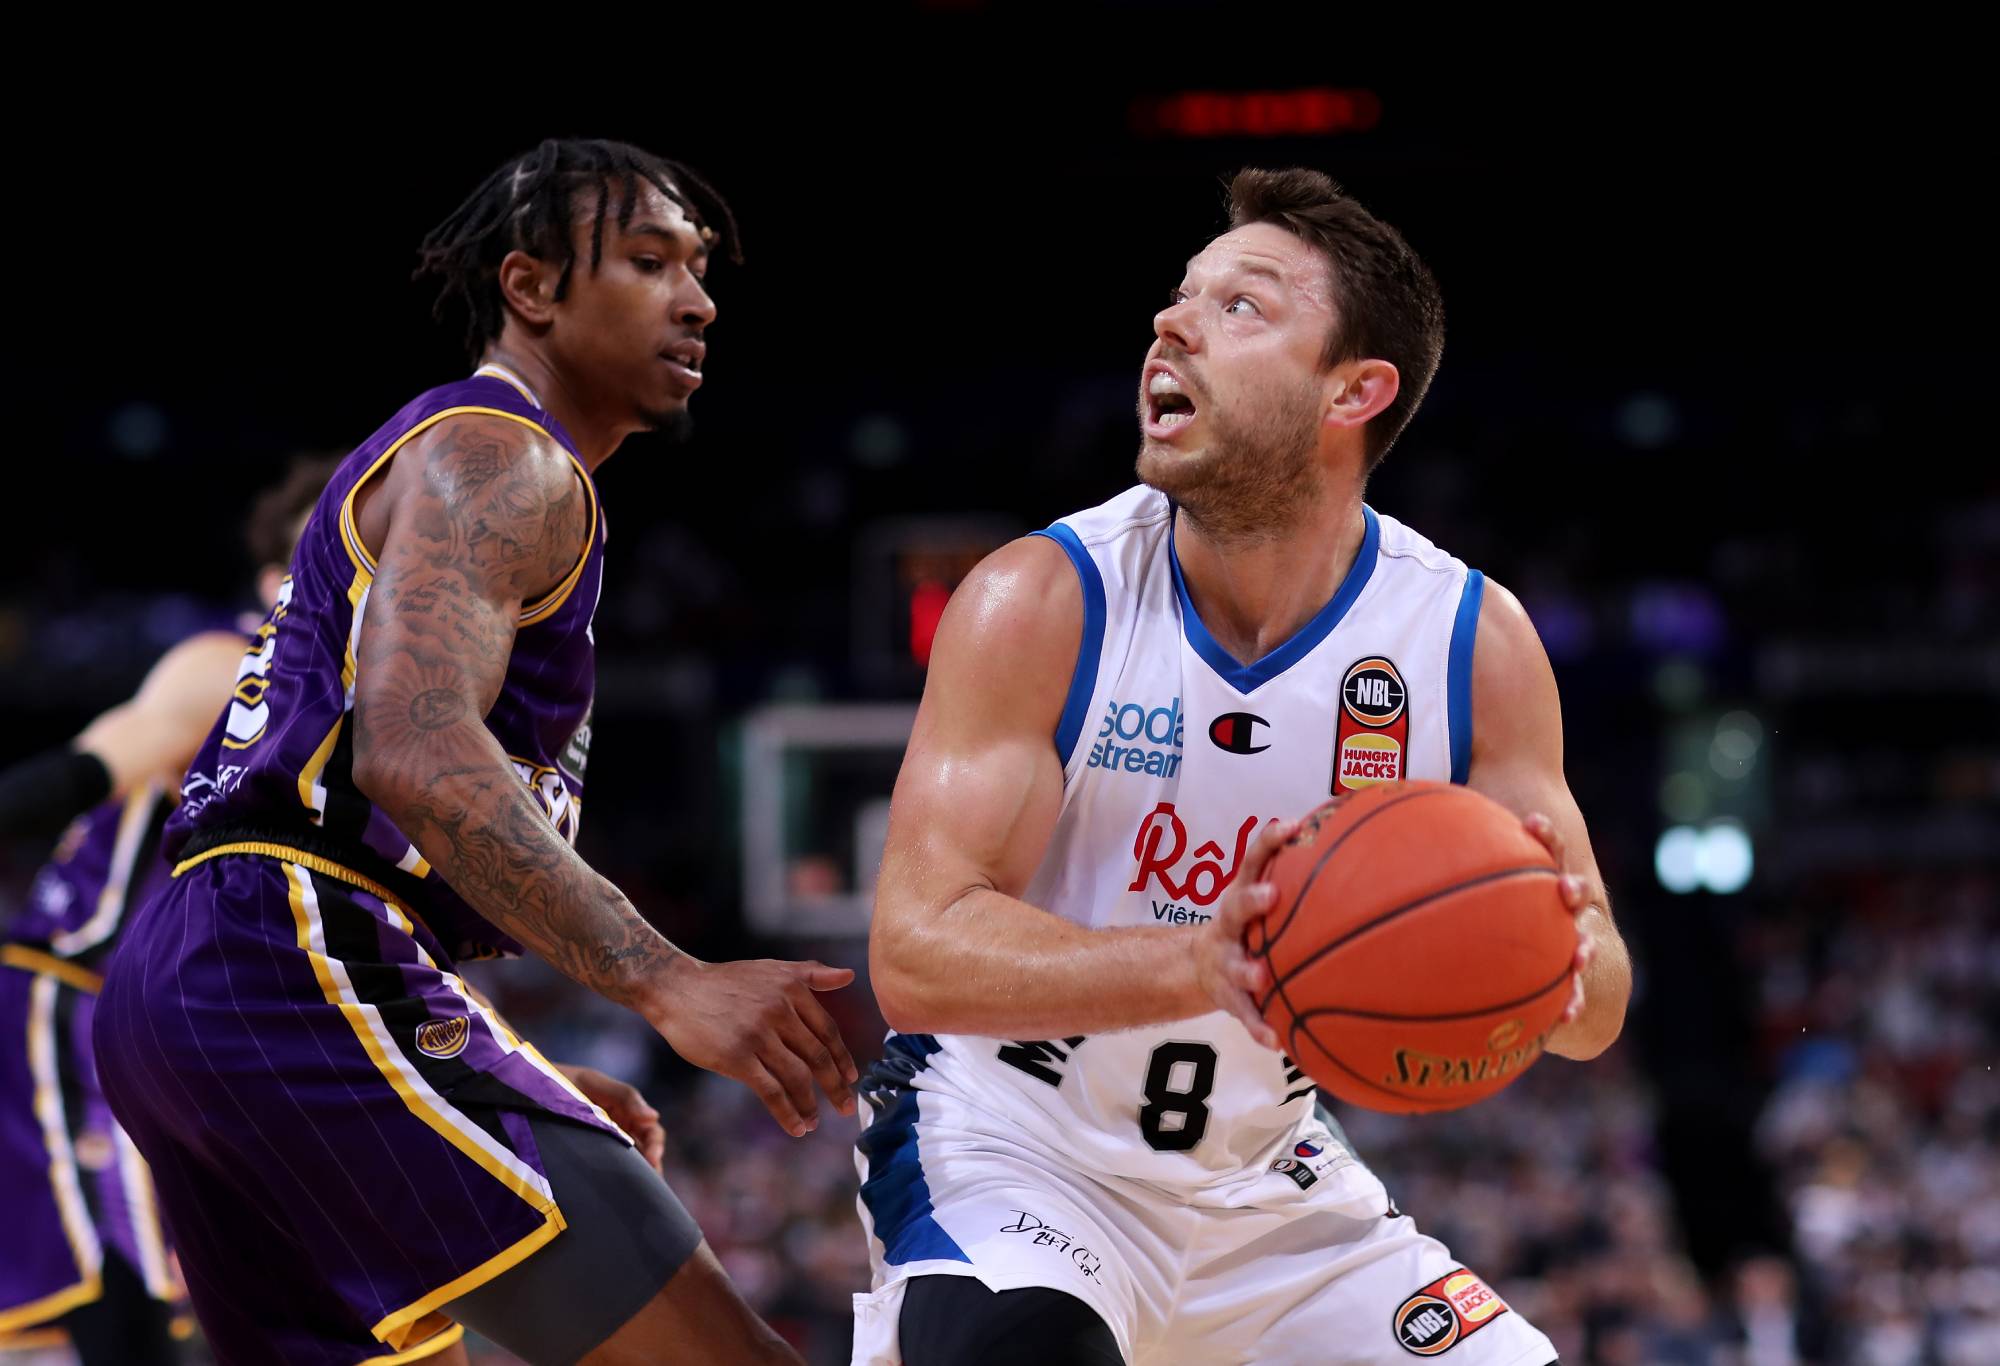 SYDNEY, AUSTRALIA - DECEMBER 05: Matthew Dellavedova of United drives to the basket during the round one NBL match between Sydney Kings and Melbourne United at Qudos Bank Arena on December 05, 2021, in Sydney, Australia. (Photo by Matt King/Getty Images)